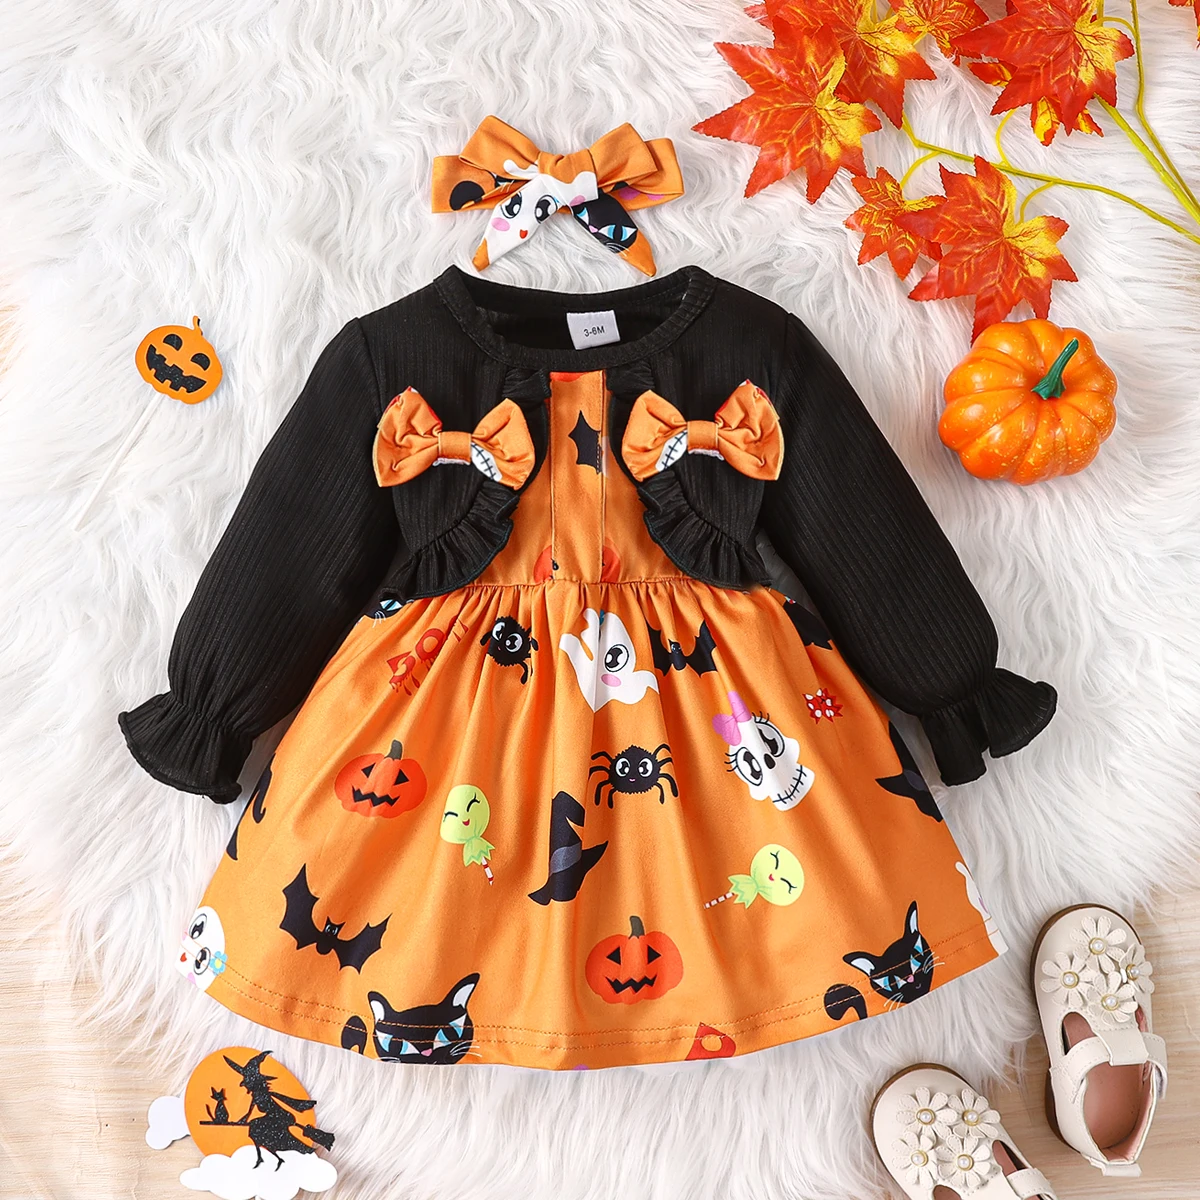 

PatPat Baby Halloween Costumes Dress Newborn Baby Girl Clothes Rib Knit Spliced Allover Print Bow Front Dress with Headband Set